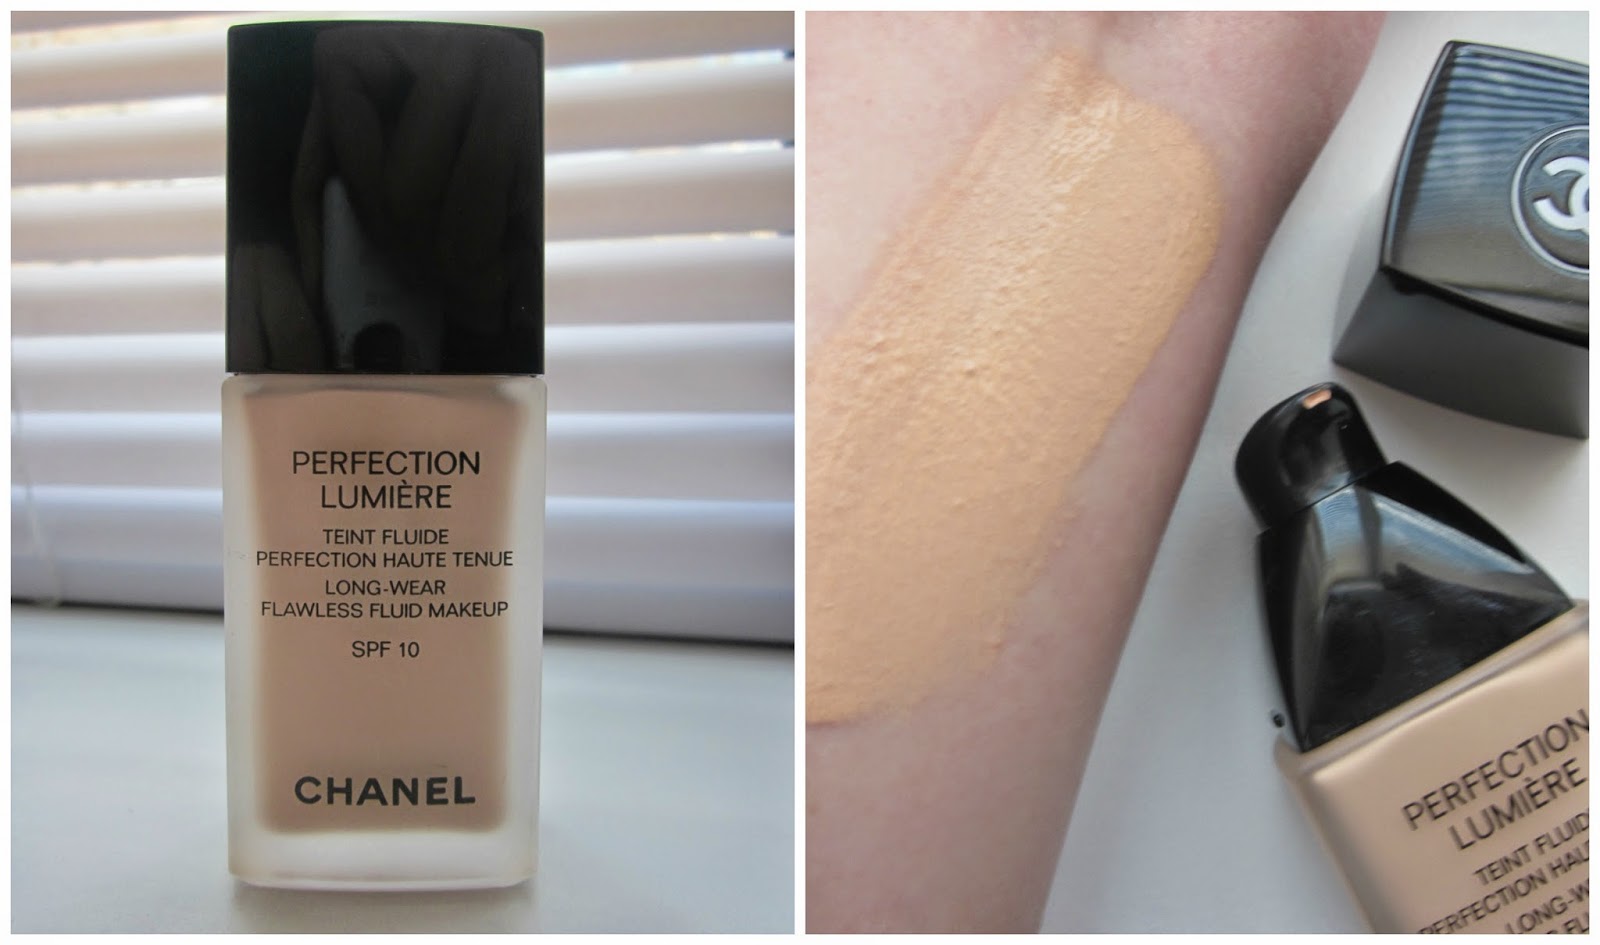 Chanel Perfection Lumière Long-Wear Flawless Fluid Makeup Review